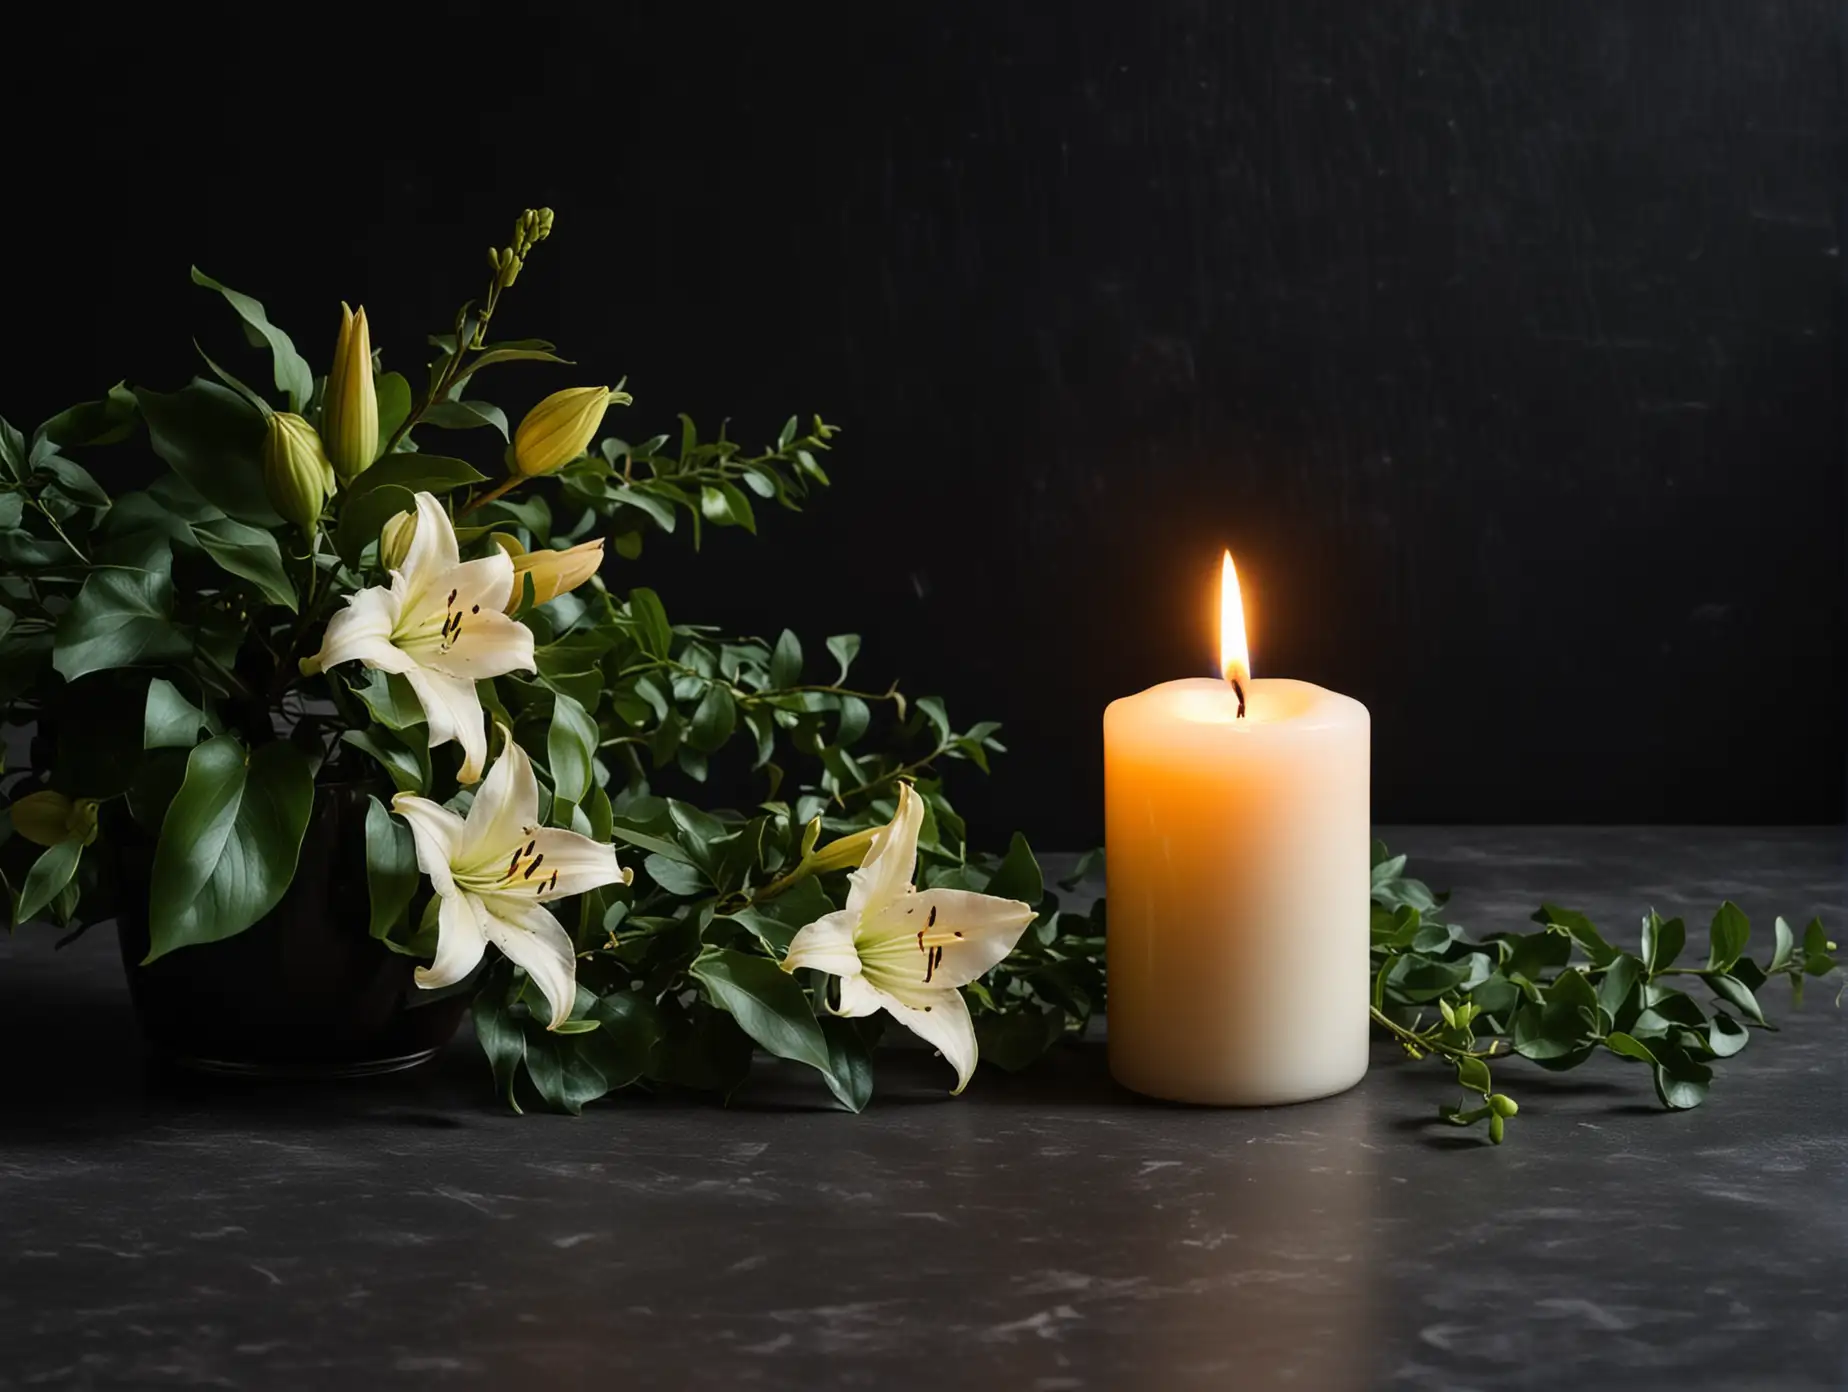 on left side small burning candle on dark table, next to a branch of lilies and branches of ivy,  wide dark background